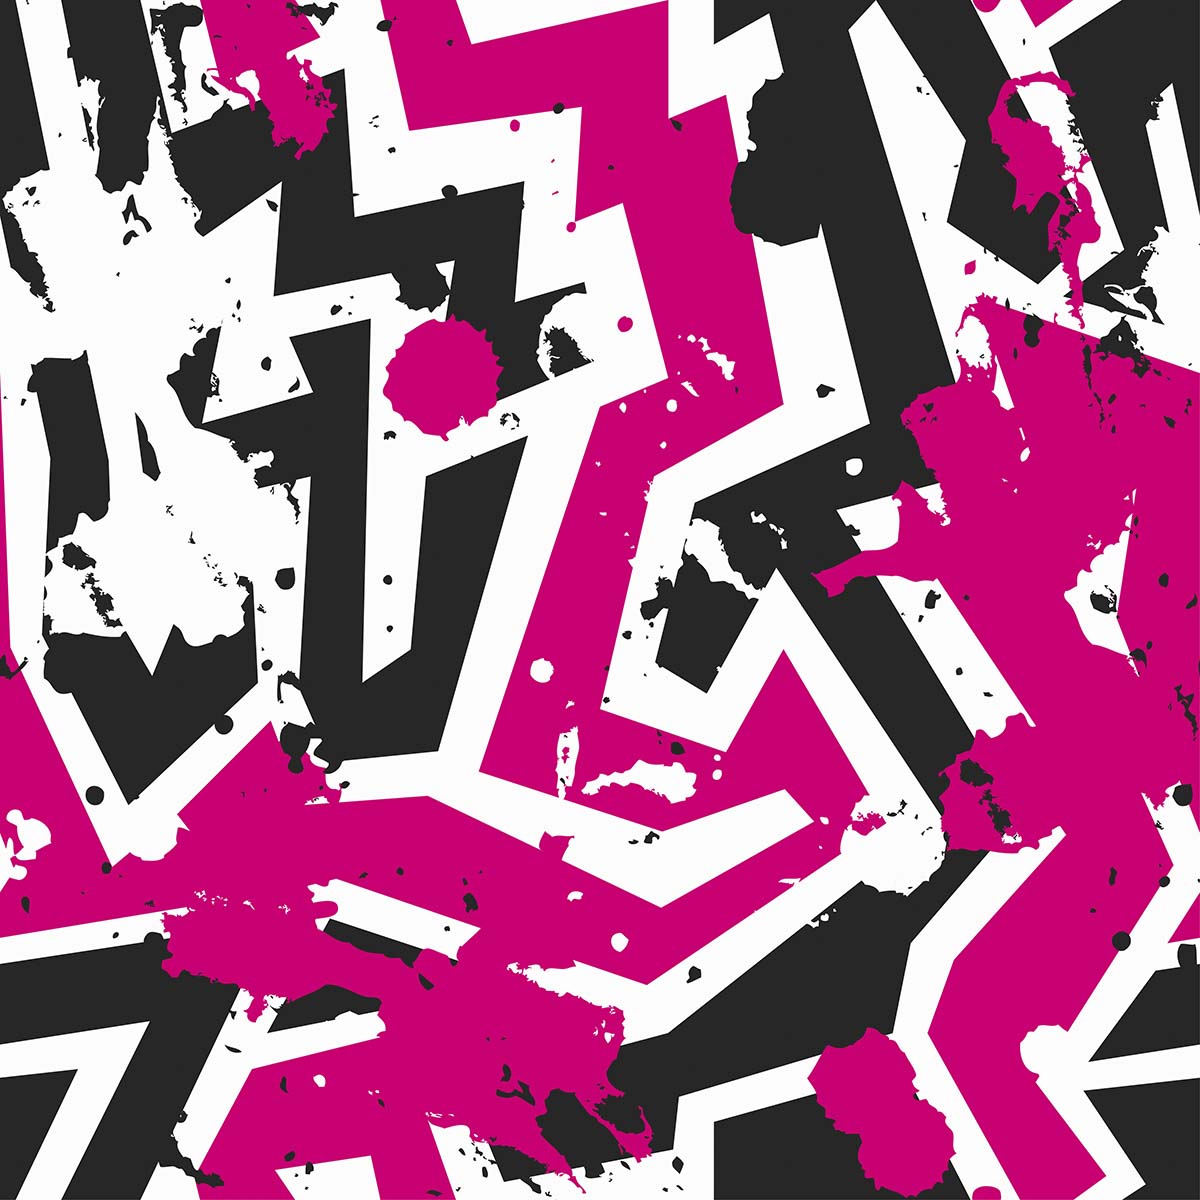 A pink and black pattern